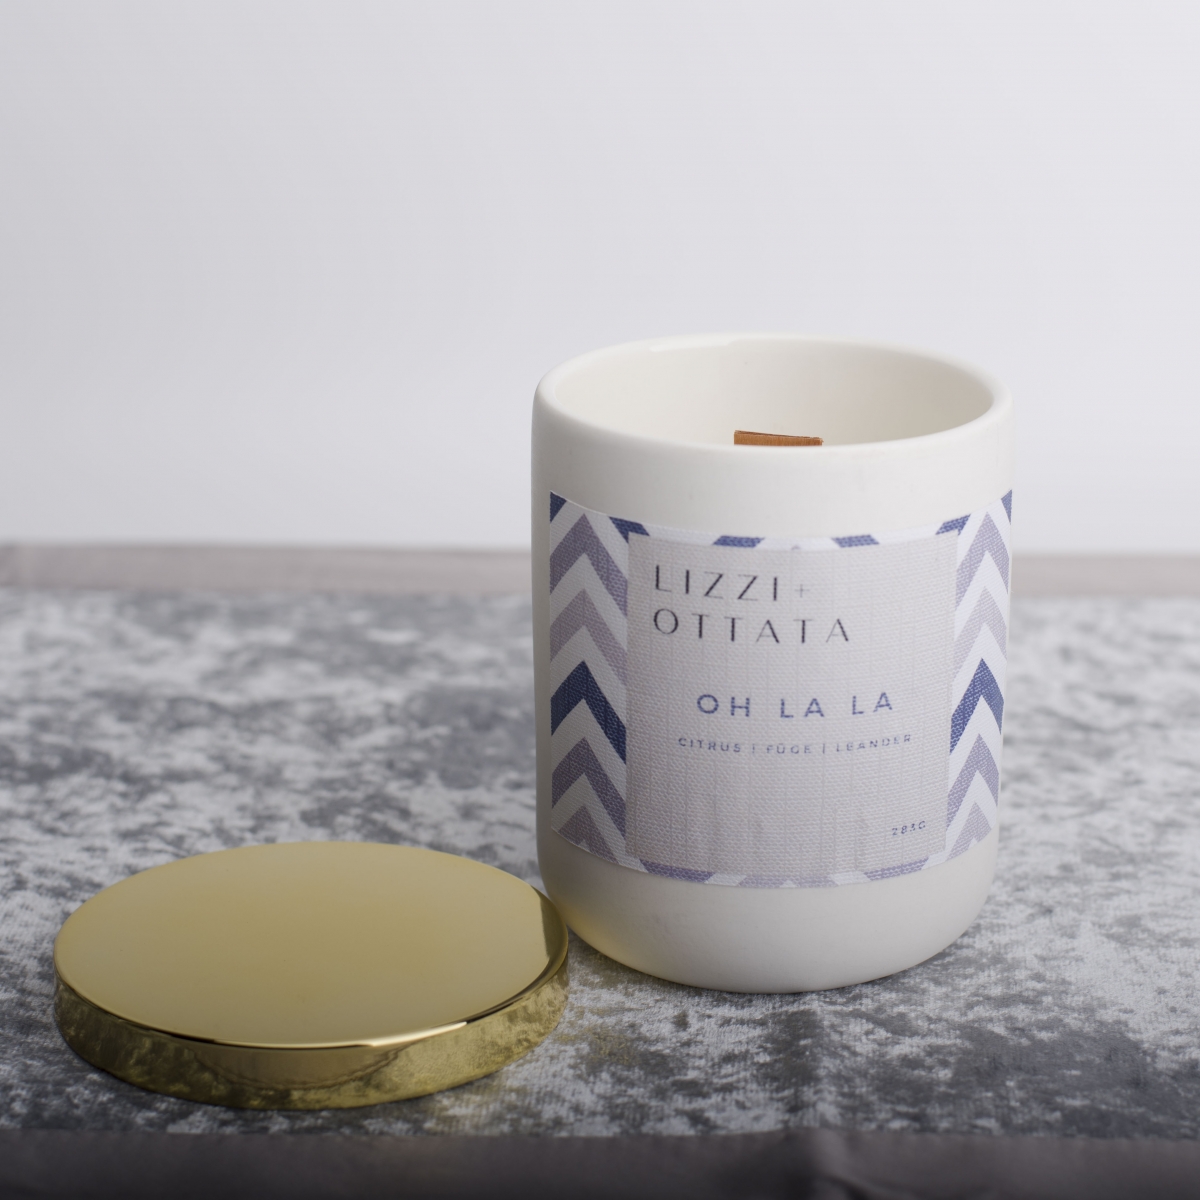 Scented Candles：Creed Silver Mountain Water ,China Factory, Best Price ,White Ceramic Jar ,Bamboo lid-HOWCANDLE-Candles,Scented Candles,Aromatherapy Candles,Soy Candles,Vegan Candles,Jar Candles,Pillar Candles,Candle Gift Sets,Essential Oils,Reed Diffuser,Candle Holder,